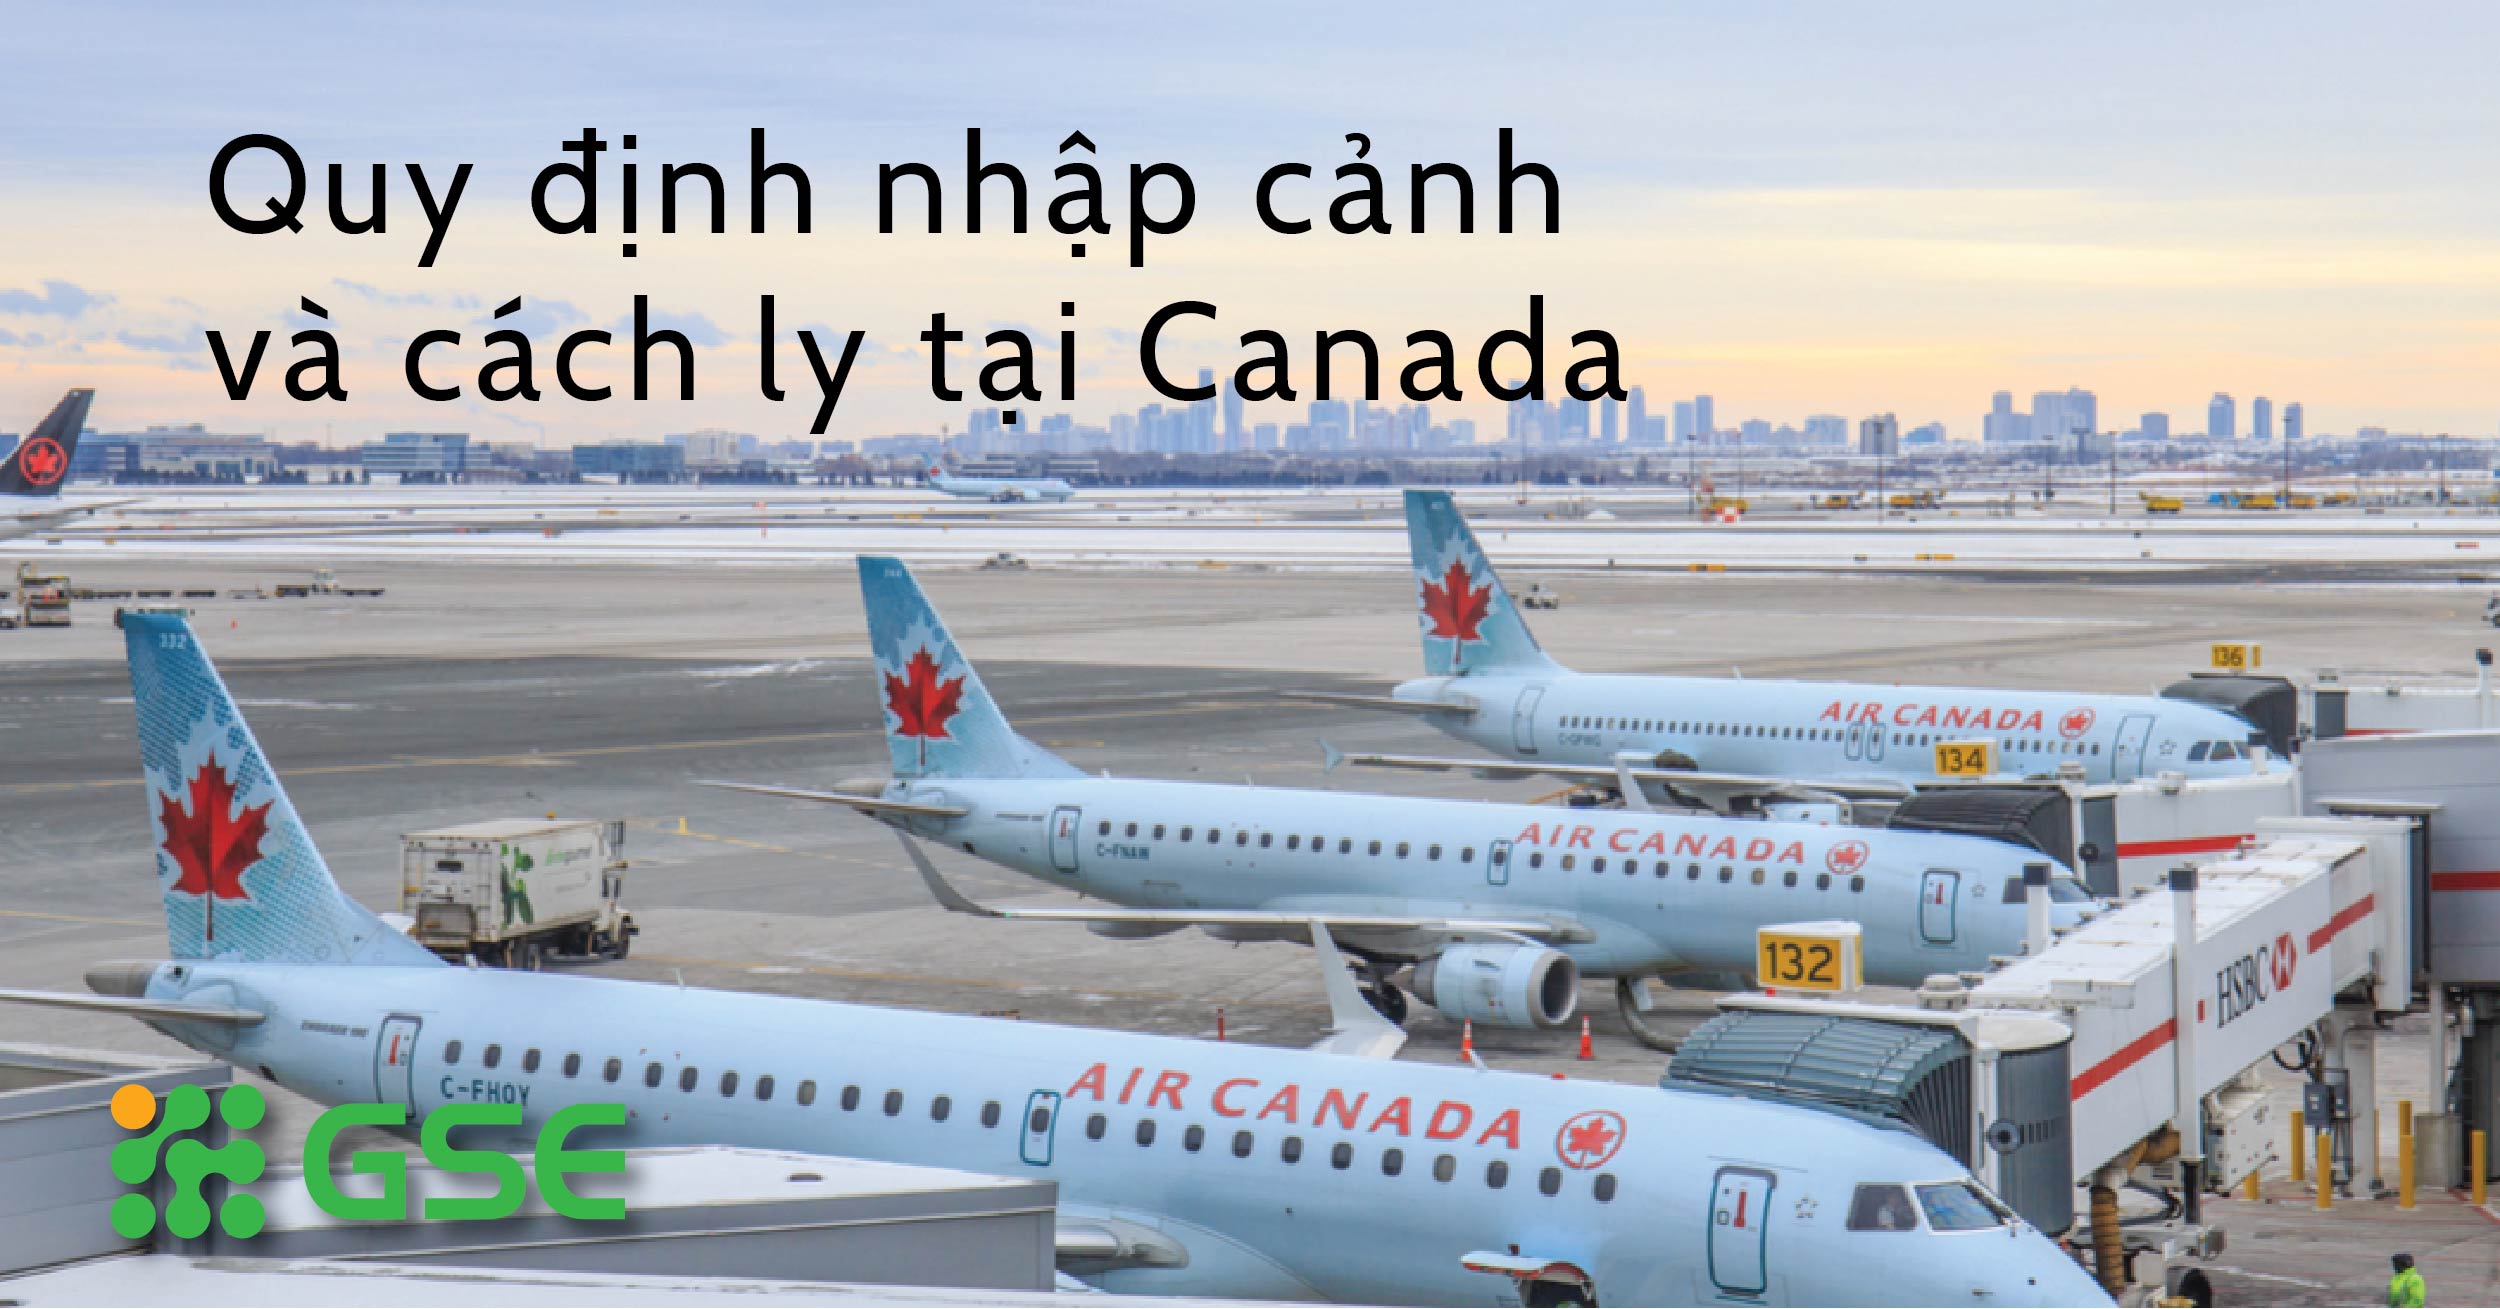 quy dinh cach ly canada 01